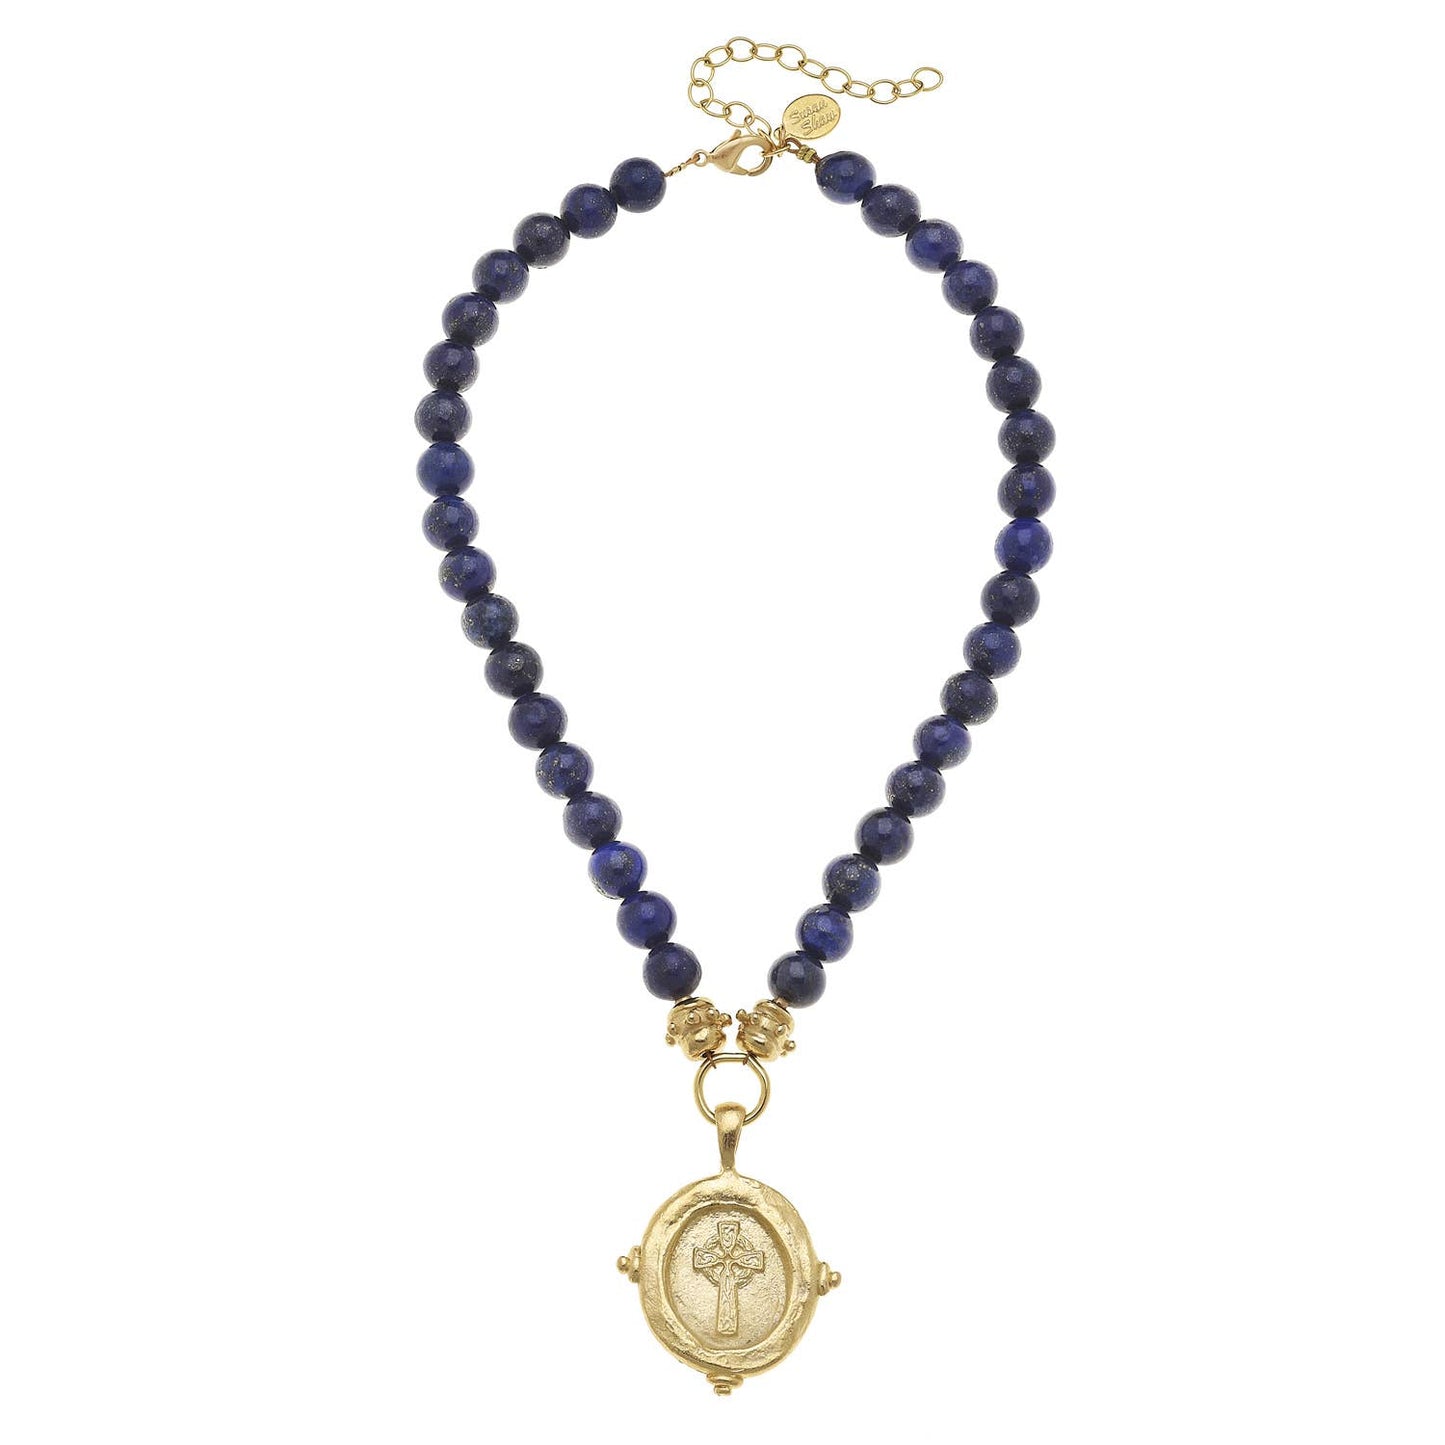 Gold Cross on Genuine Lapis Necklace